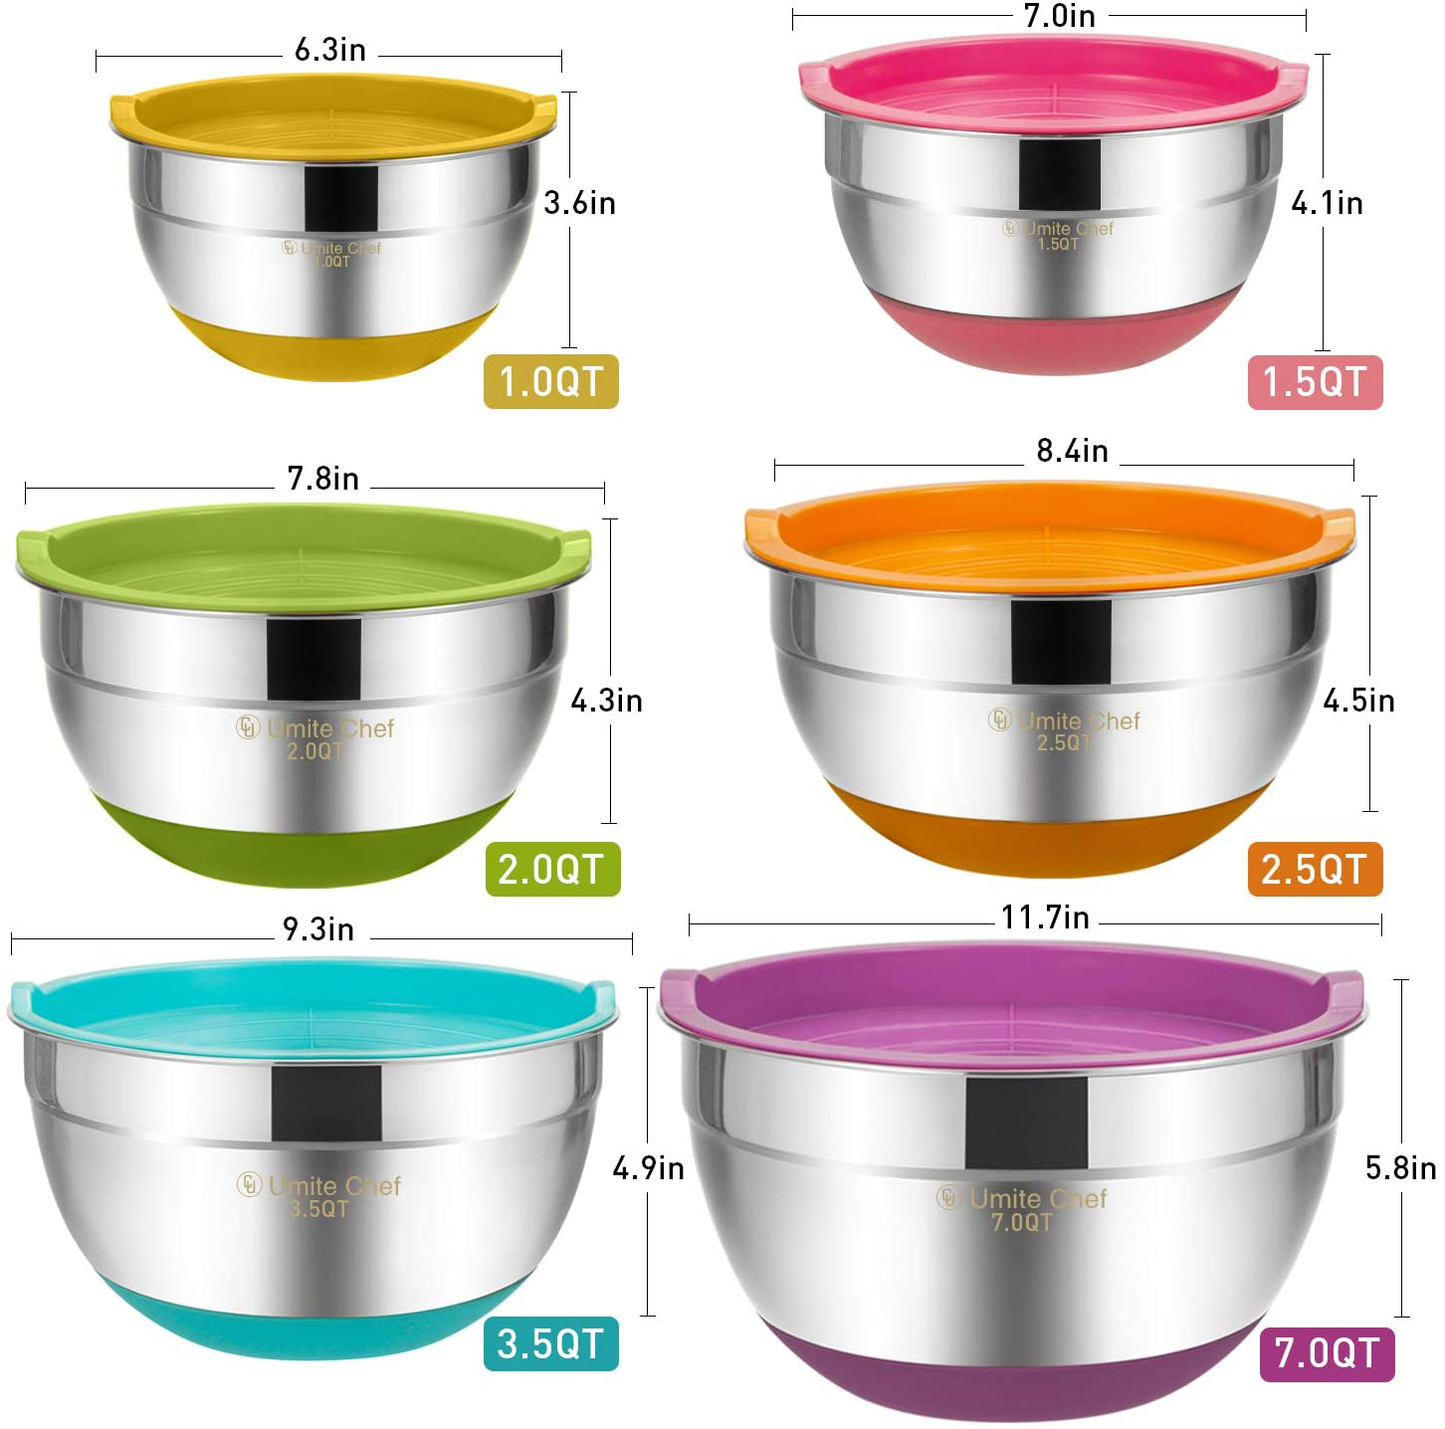 Mixing Bowls with Airtight Lids，6 piece Stainless Steel Metal Nesting Storage Bowls by Umite Chef, Non-Slip Bottoms Size 7, 3.5, 2.5, 2.0,1.5, 1QT, Great for Mixing & Serving(Black)